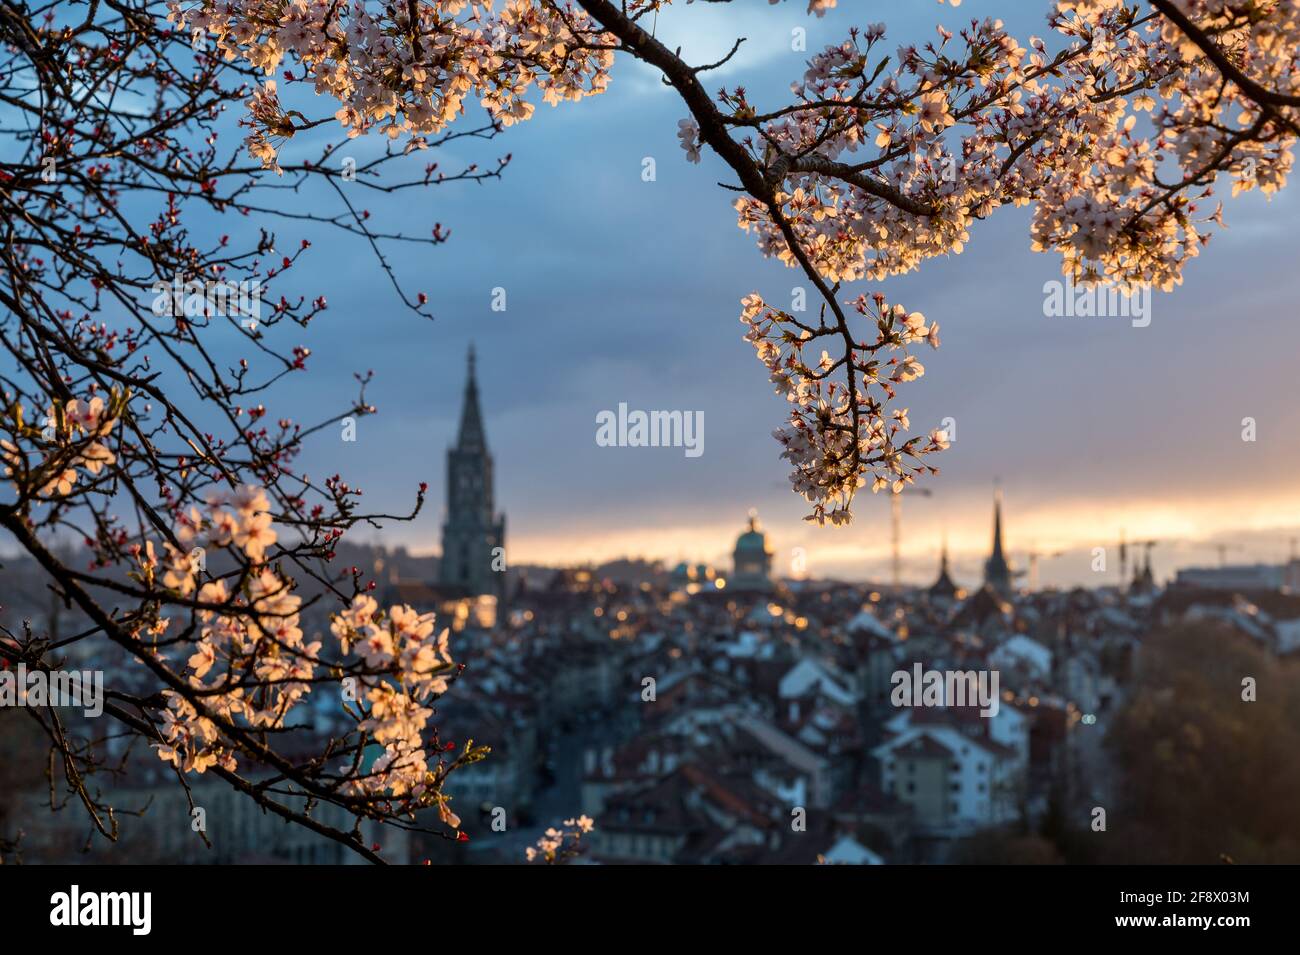 oldtown of Bern on a spring sunset Stock Photo